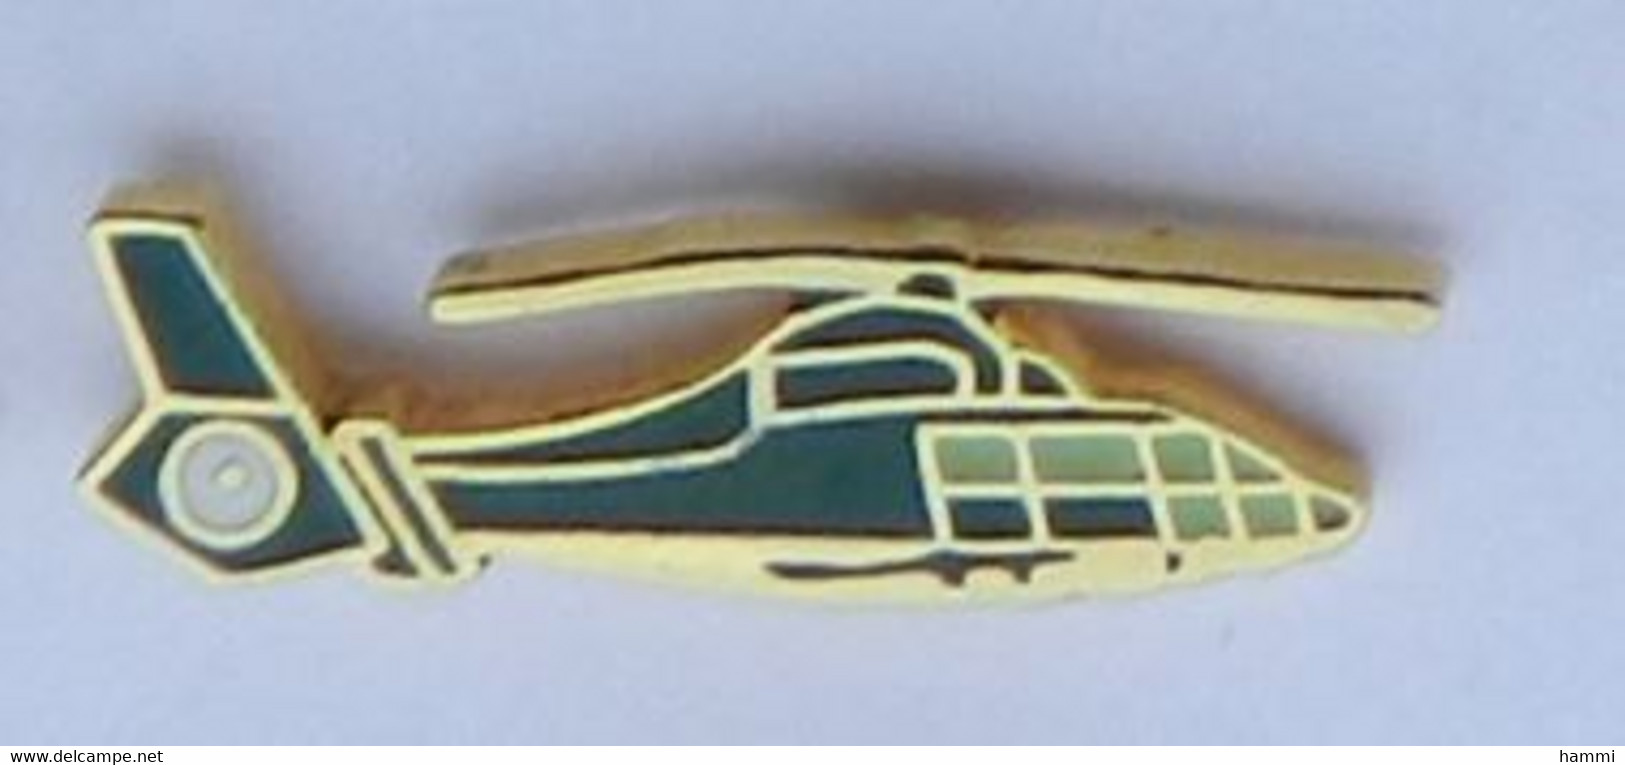 T20 Pin's AVION HELICO HELICOPTERE VERT Version 2 Achat Immédiat - Avions